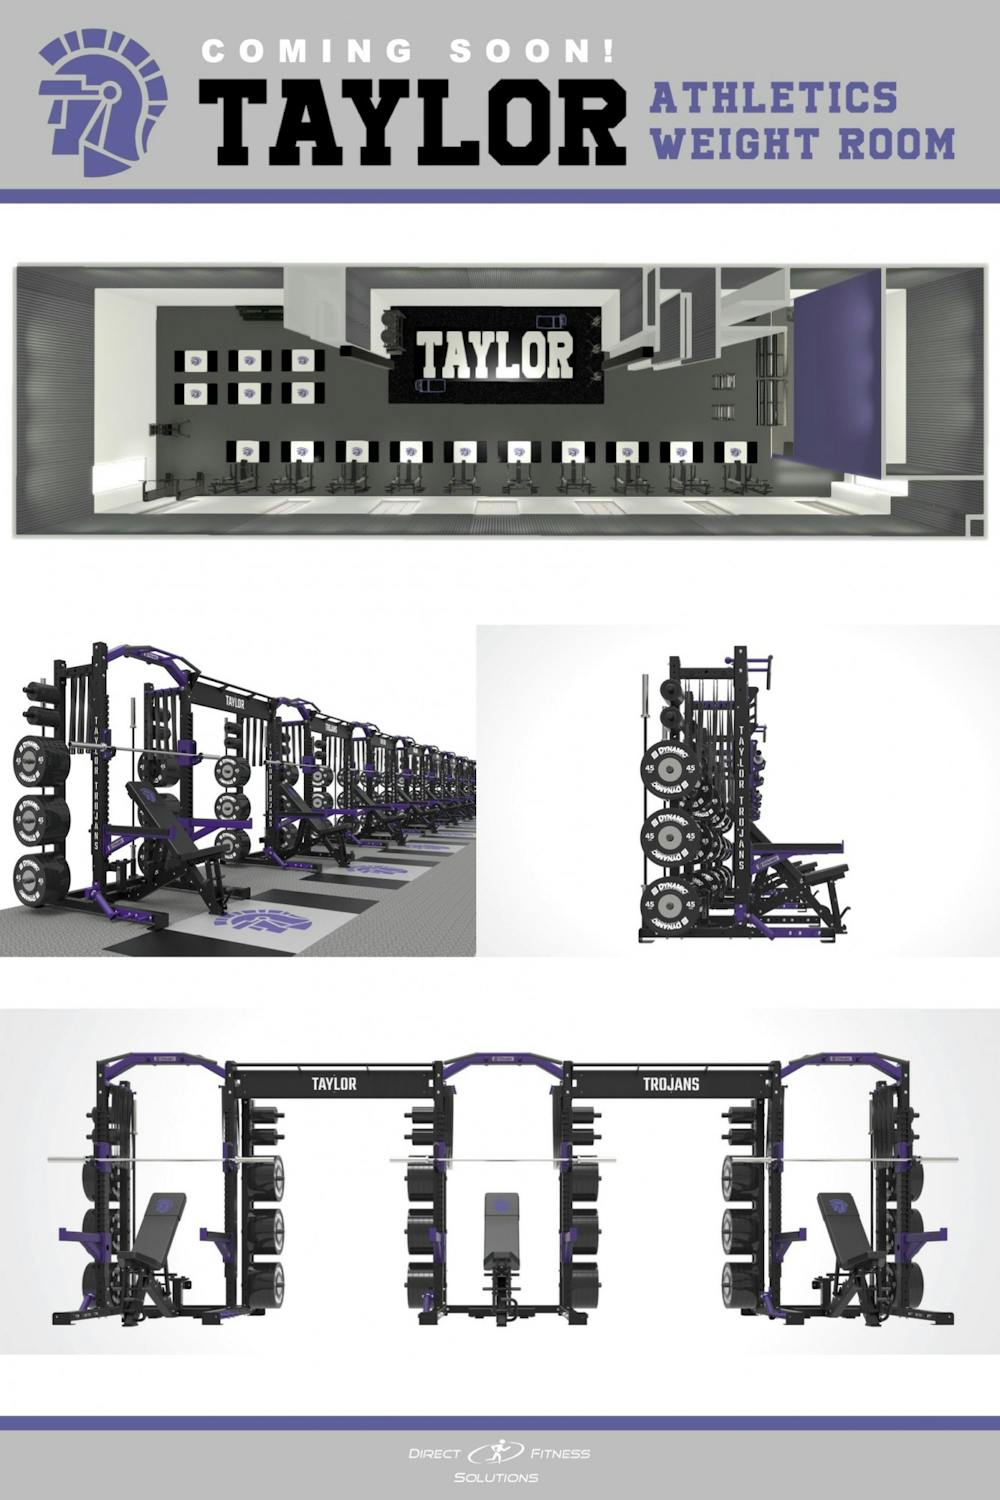 Weight room plans finalized